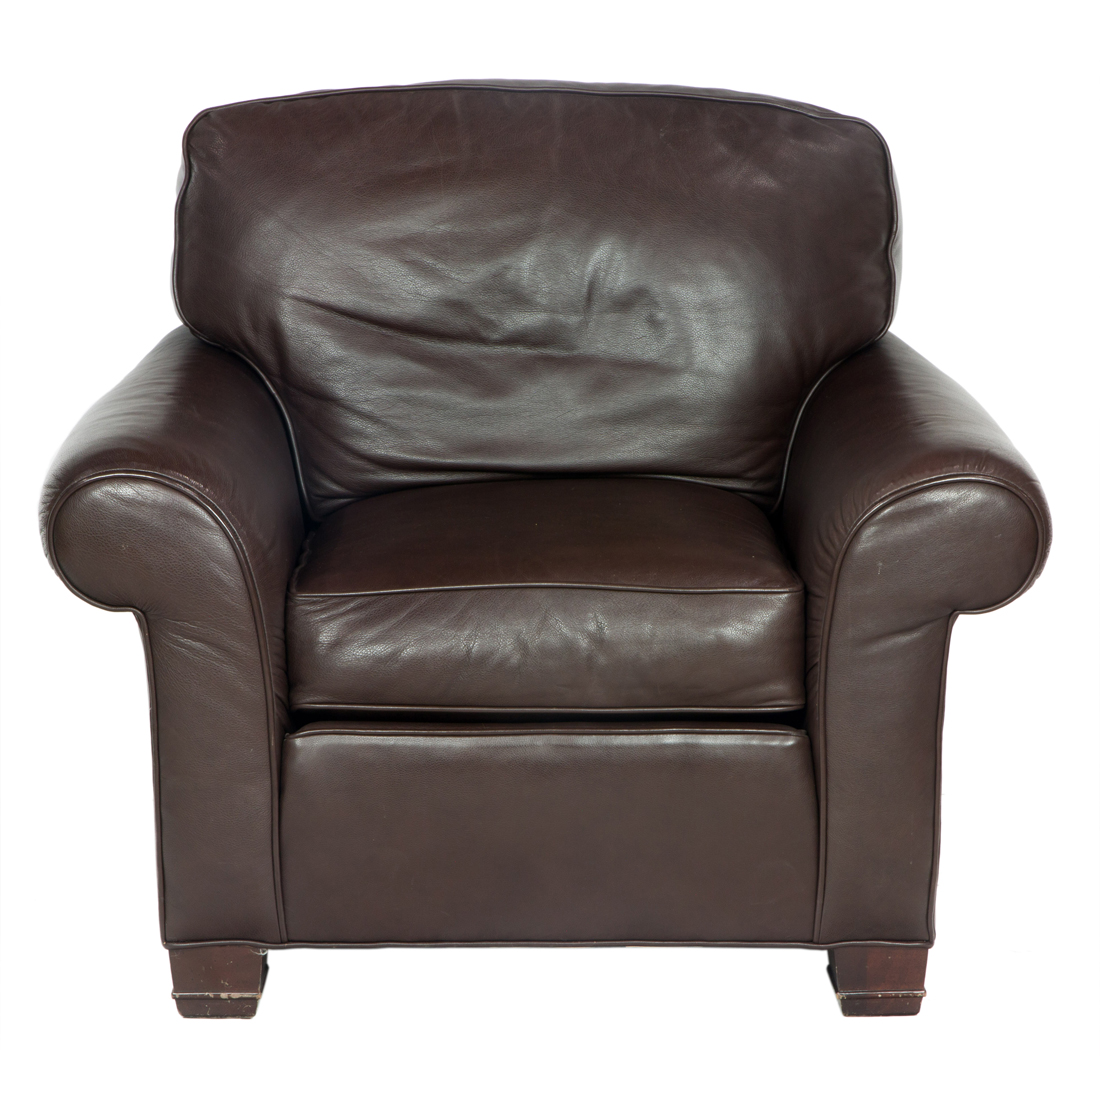 A WHITTEMORE SHERRILL LEATHER CLUB 2d30ac